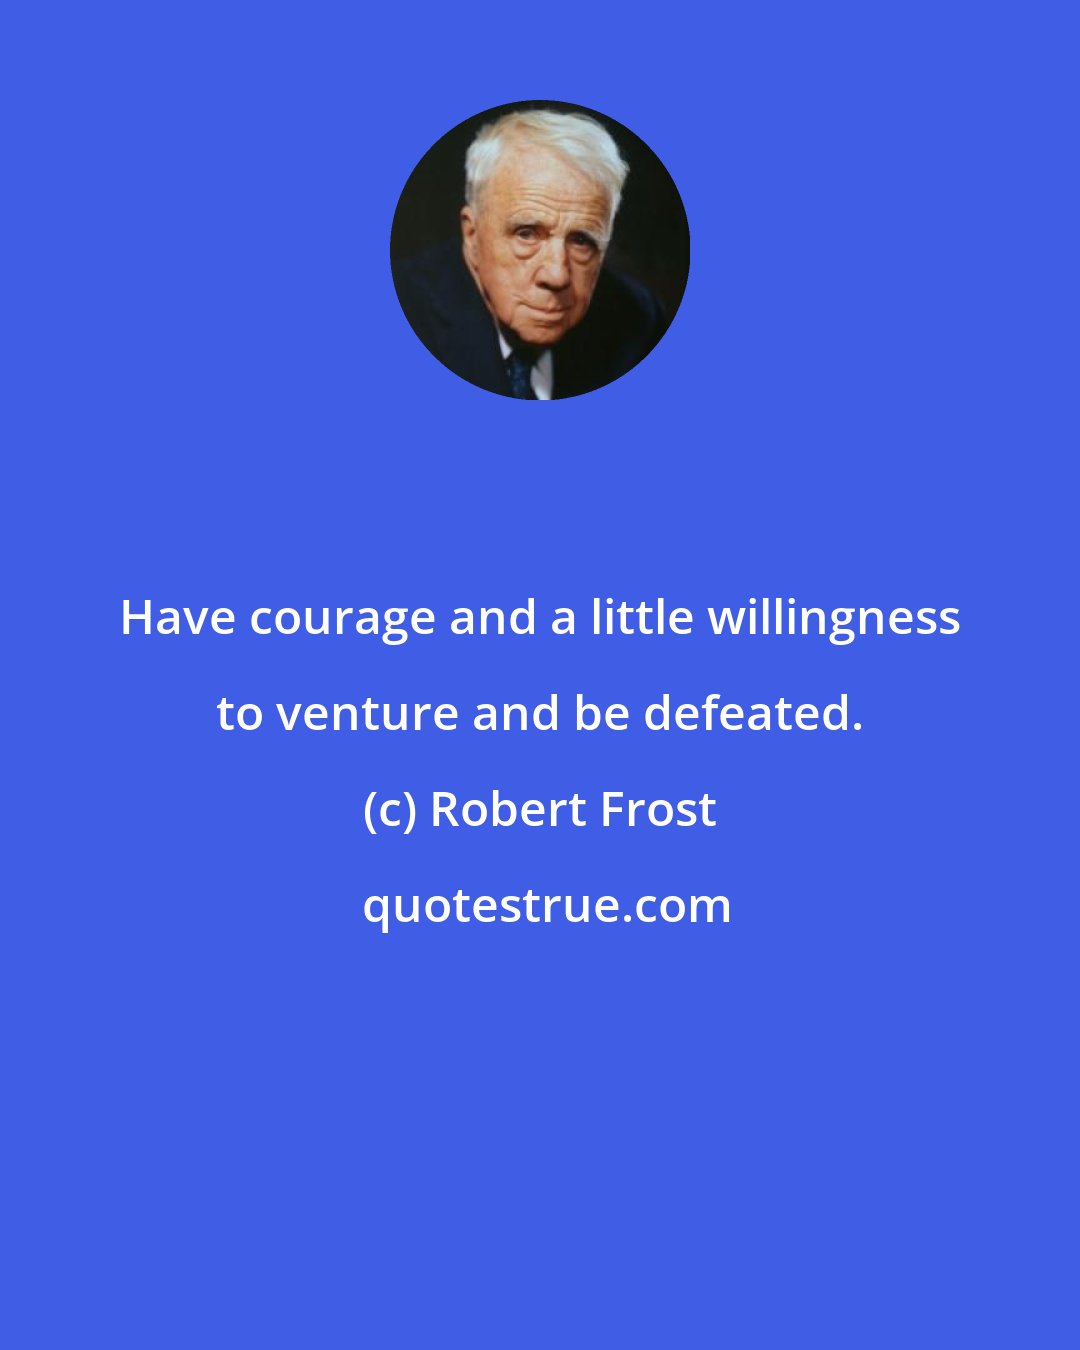 Robert Frost: Have courage and a little willingness to venture and be defeated.